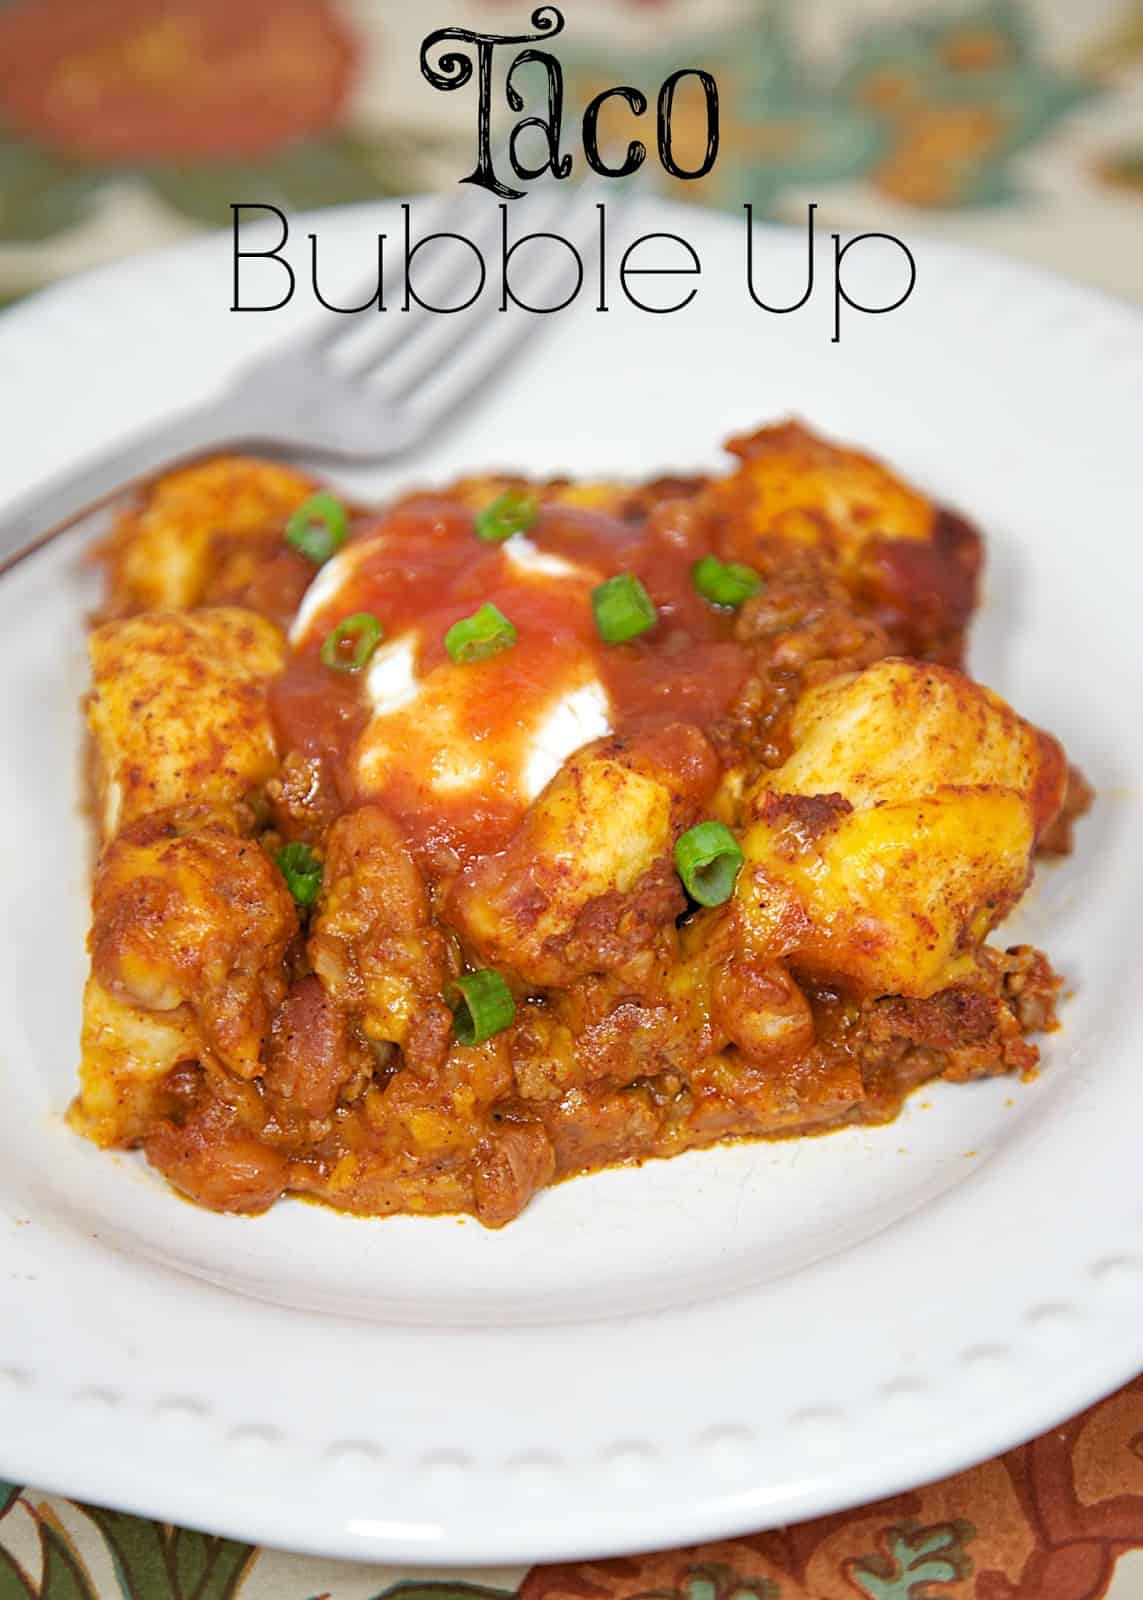 Taco Bubble Up Recipe - taco meat, beans, salsa tossed with refrigerated biscuits - fun twist to taco night! Quick Mexican recipe with everyday ingredients. Top with your favorite taco toppings!!